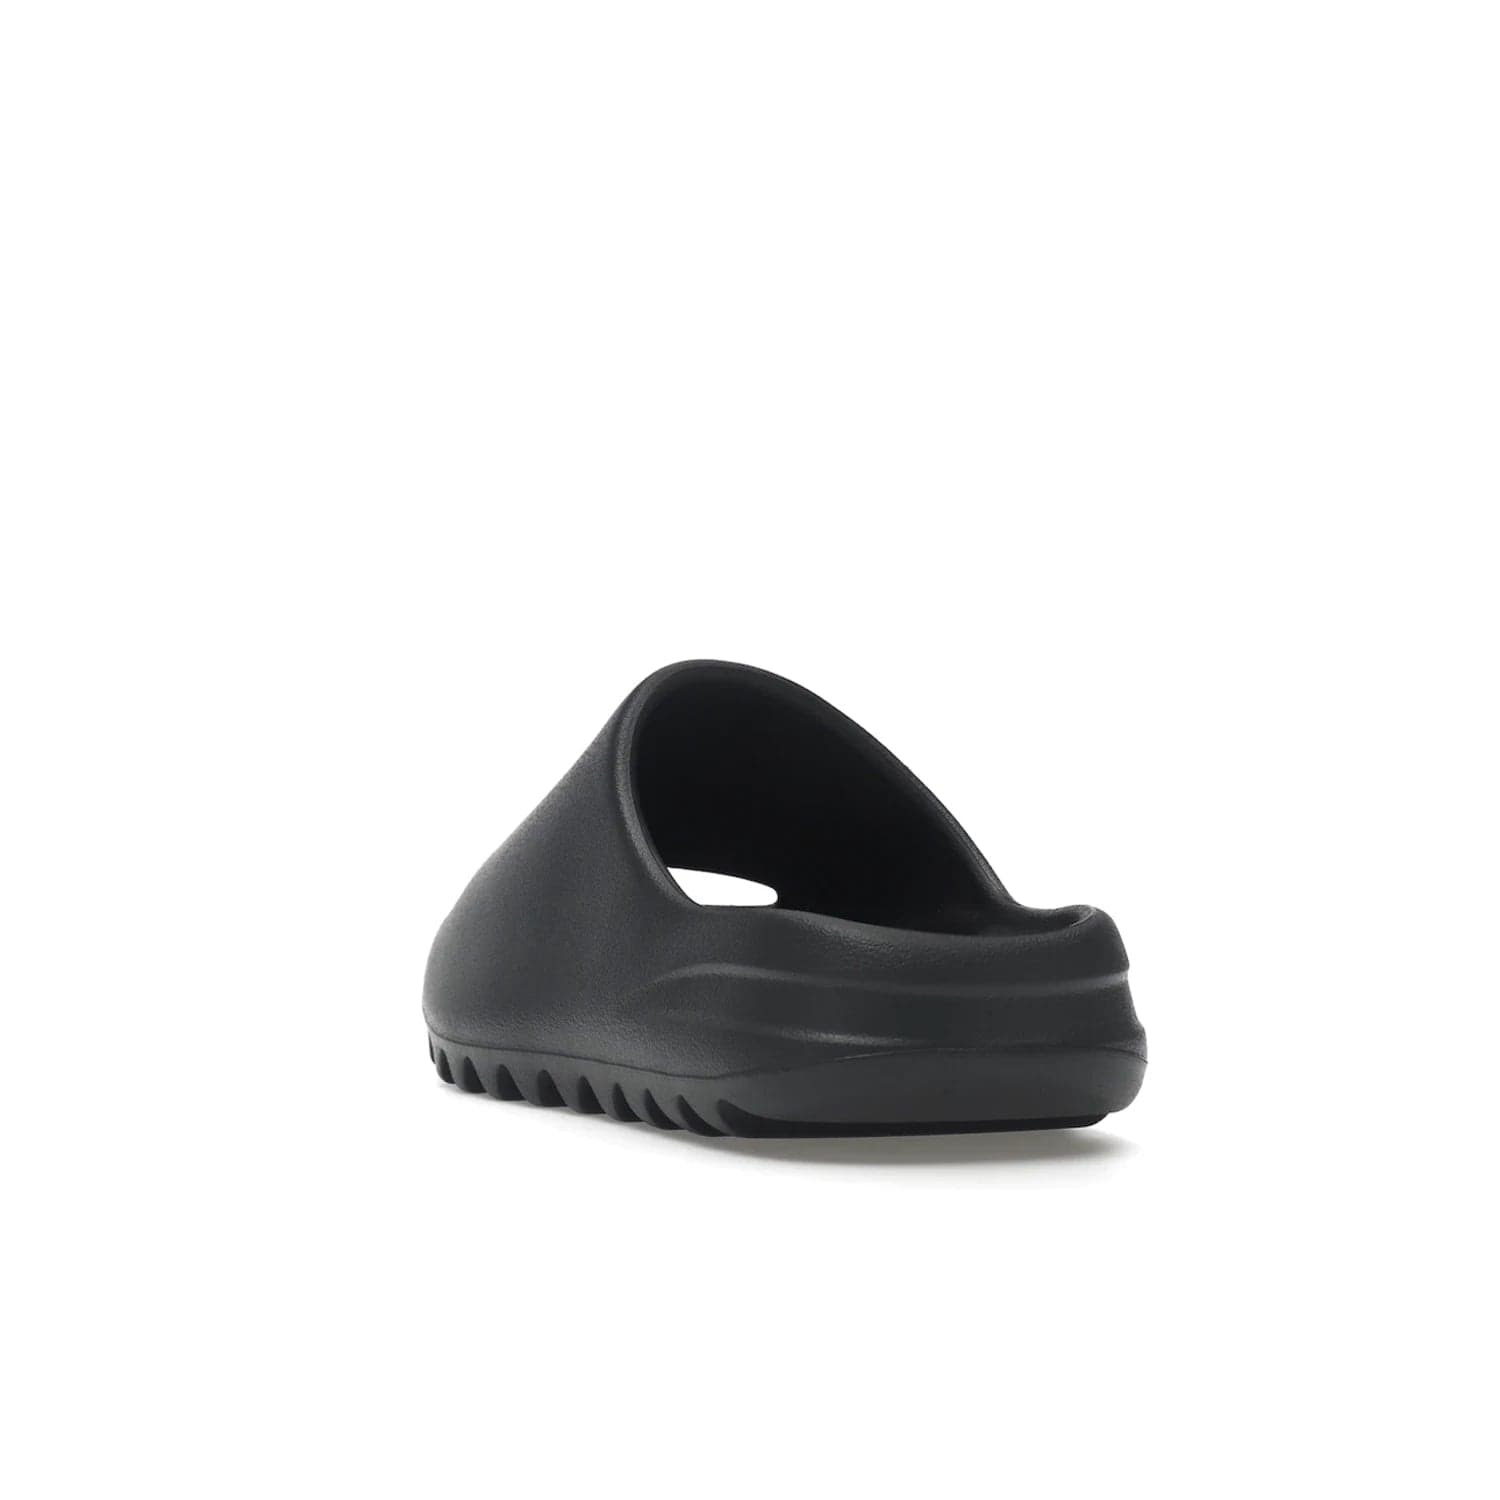 adidas Yeezy Slide Slate Grey - Image 26 - Only at www.BallersClubKickz.com - Stylish & comfortable adidas Yeezy Slide Slate Grey features an EVA foam upper, strategic cutouts, textured outsole pattern, & easy slip-on design for modern comfort & classic style.